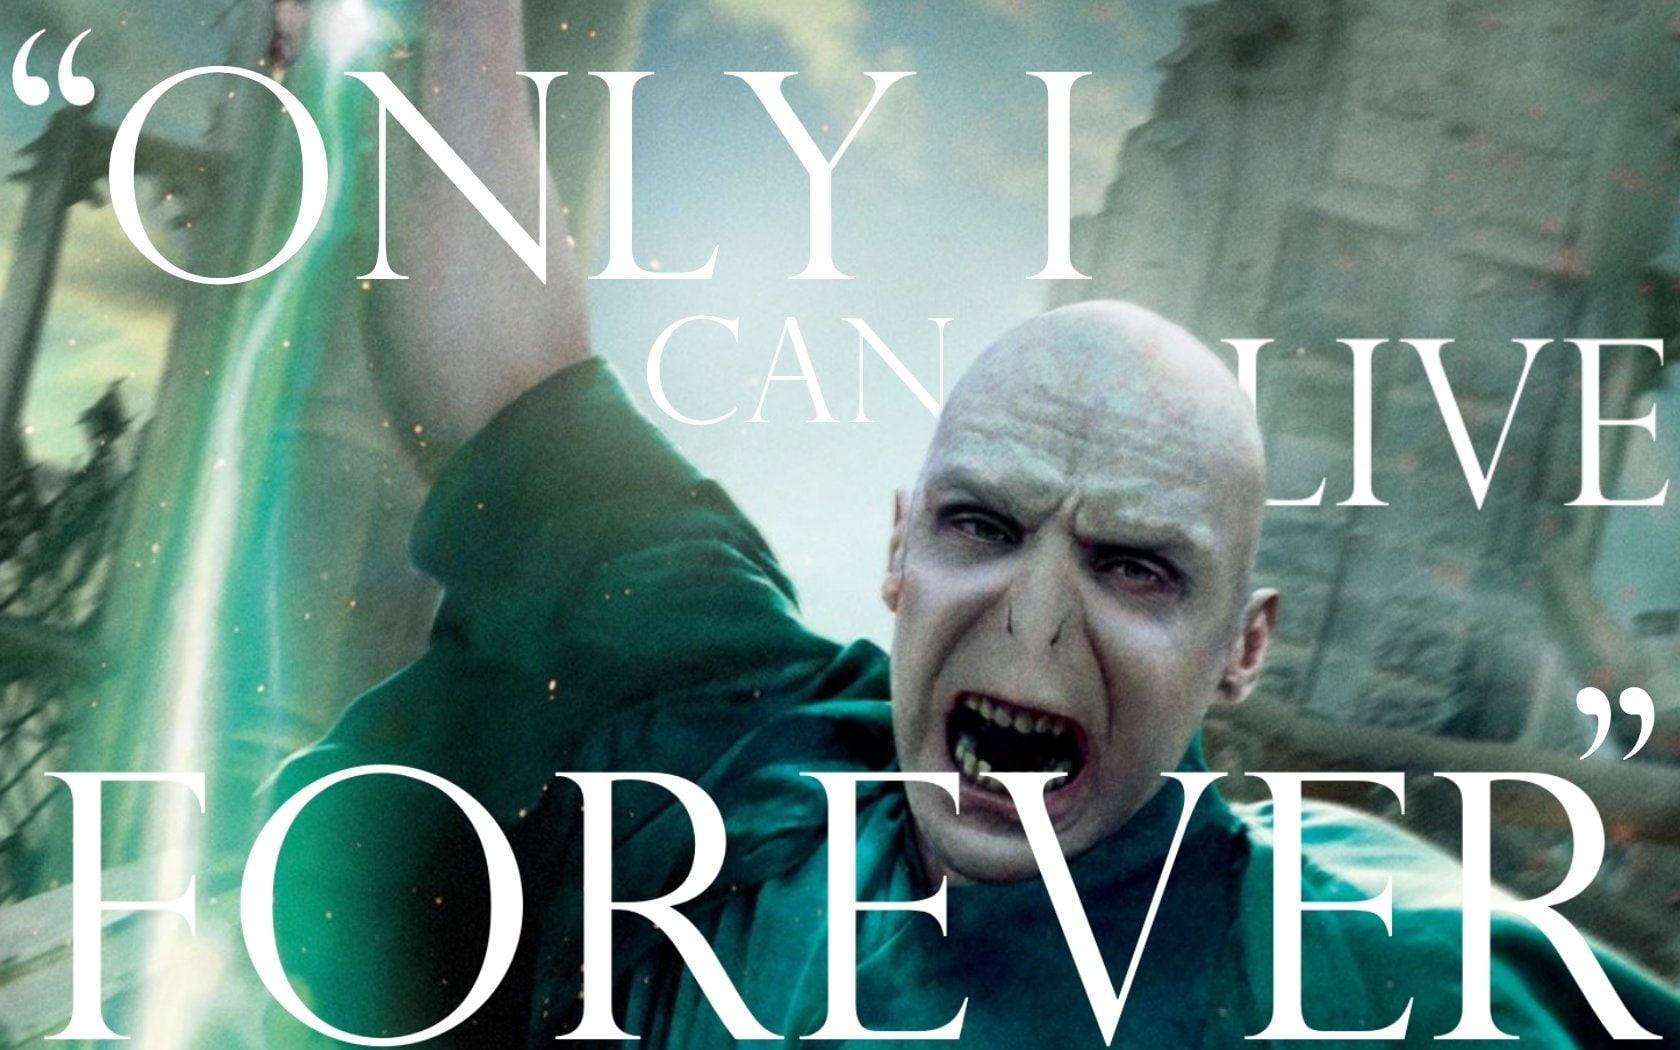 Harry Potter, Harry Potter And The Deathly Hallows: Part 2